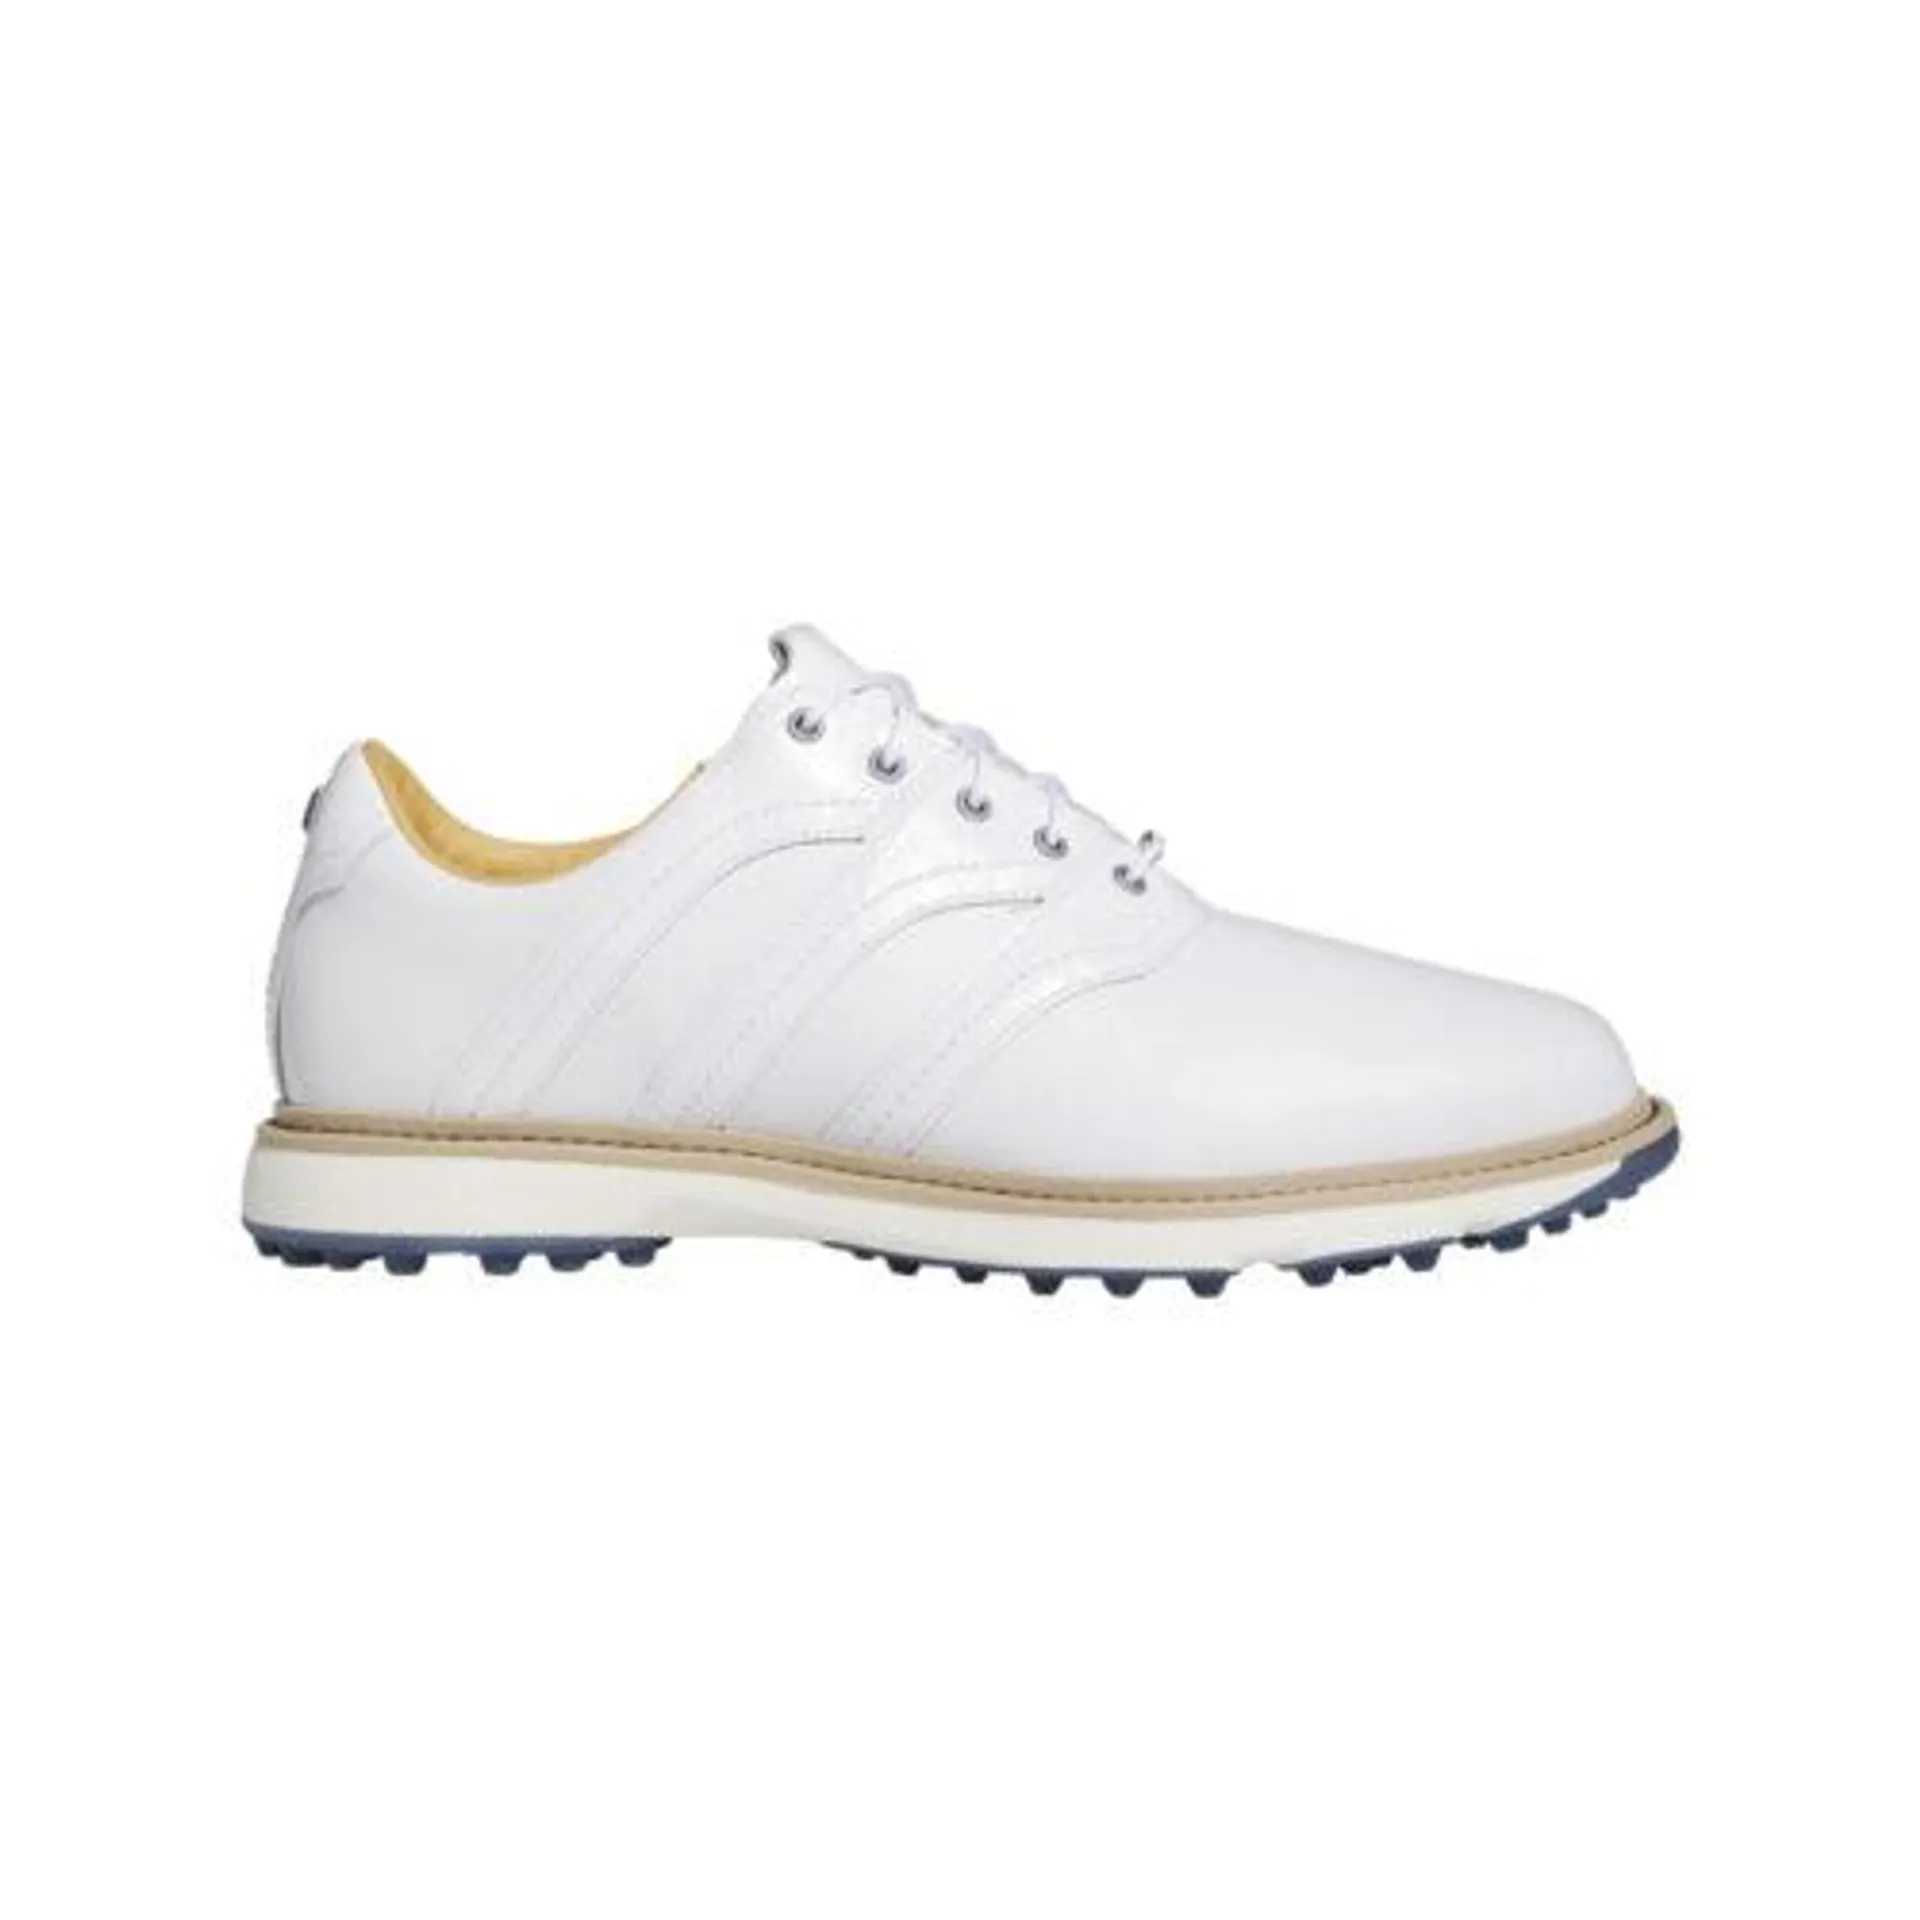 adidas MC Z-Traxion Golf shoes – White IF2713